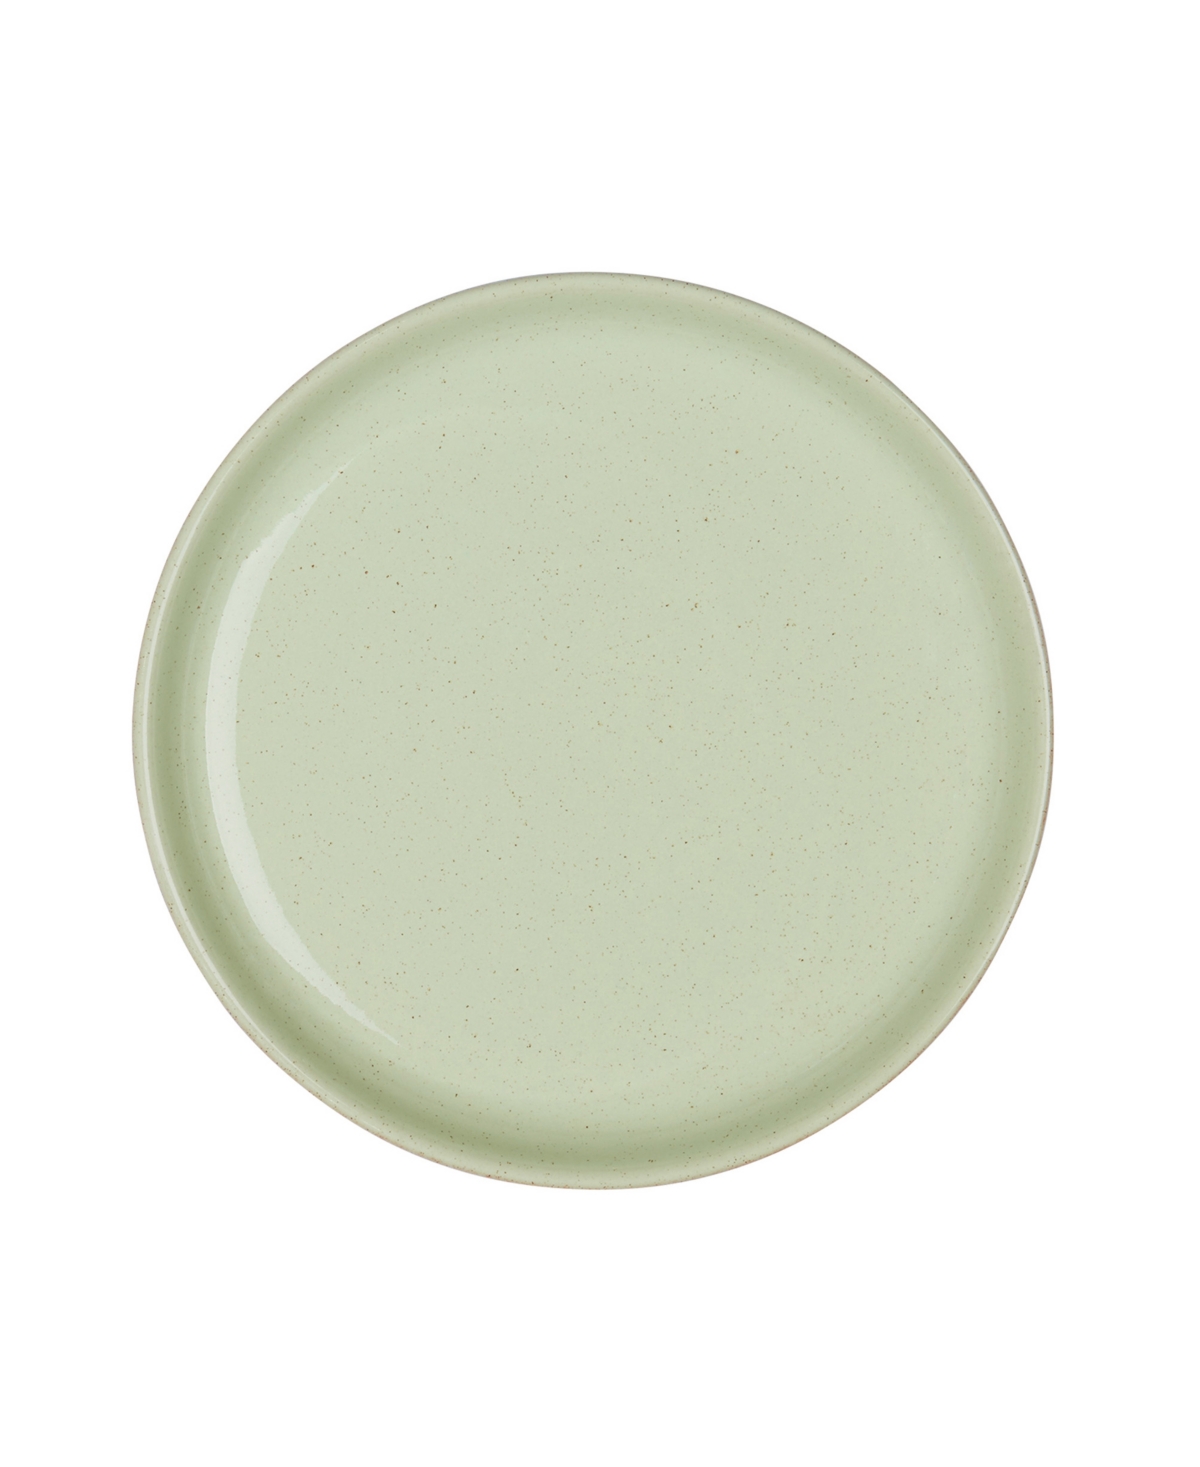 Heritage Heritage Orchard Medium Coupe Plate - Pastel Green